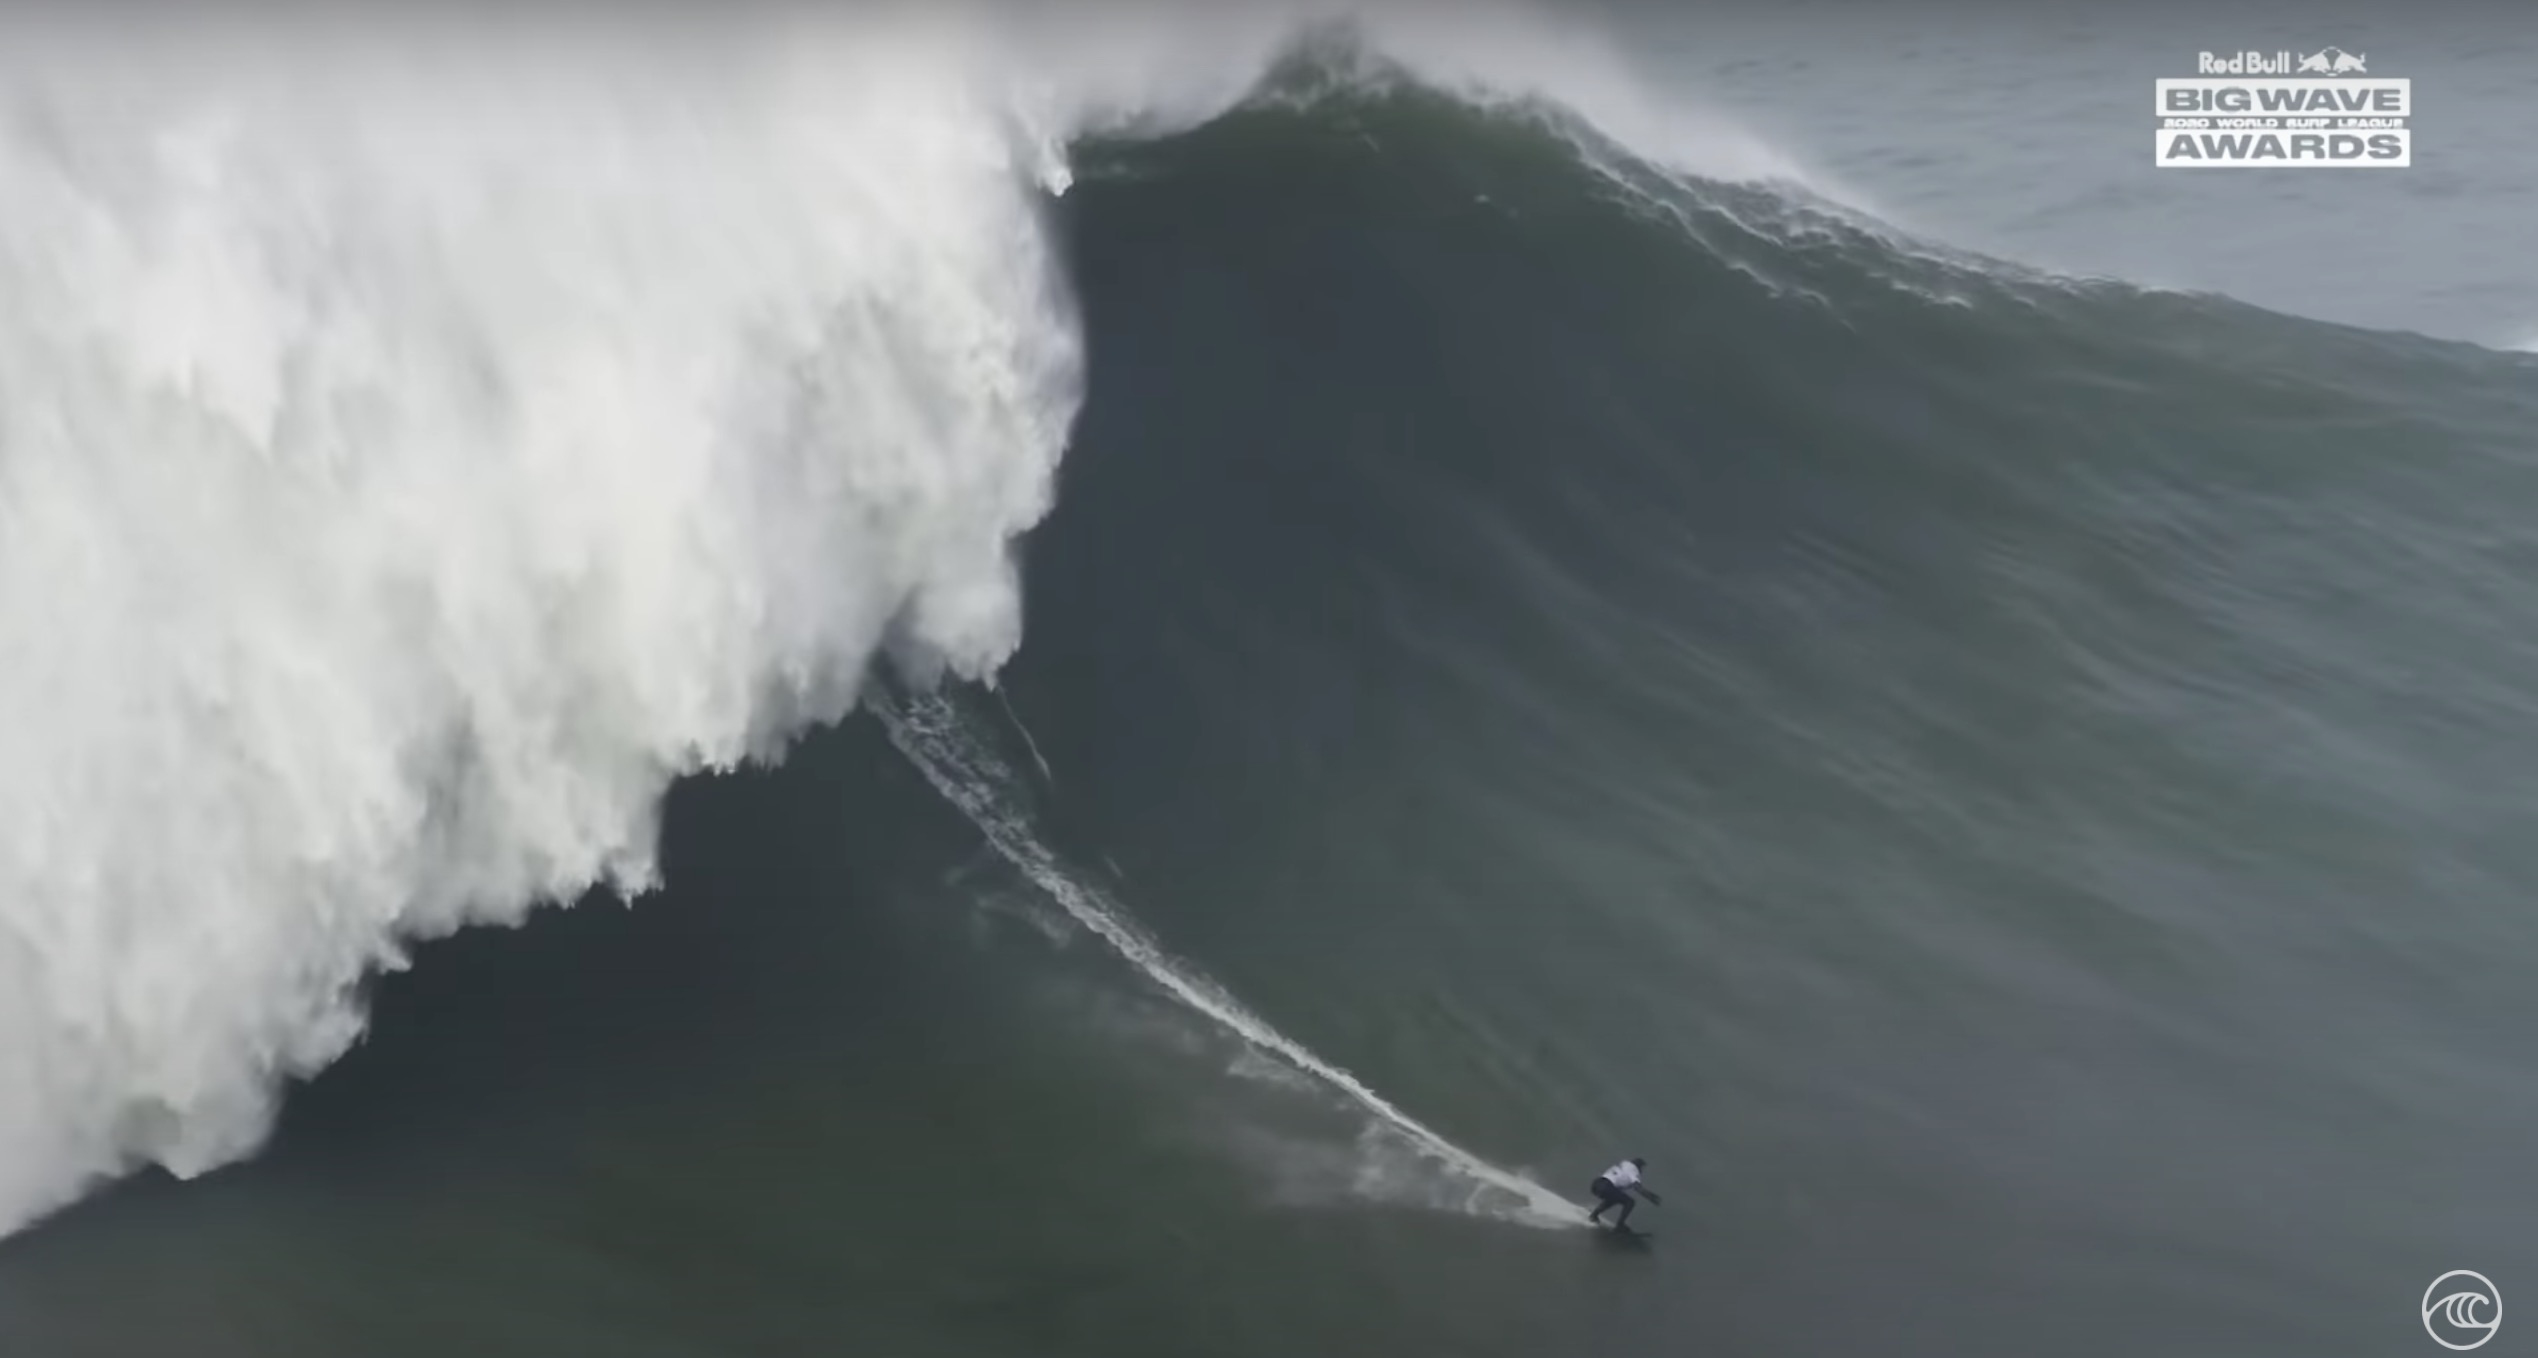 Gabeira rides out the monster wave.